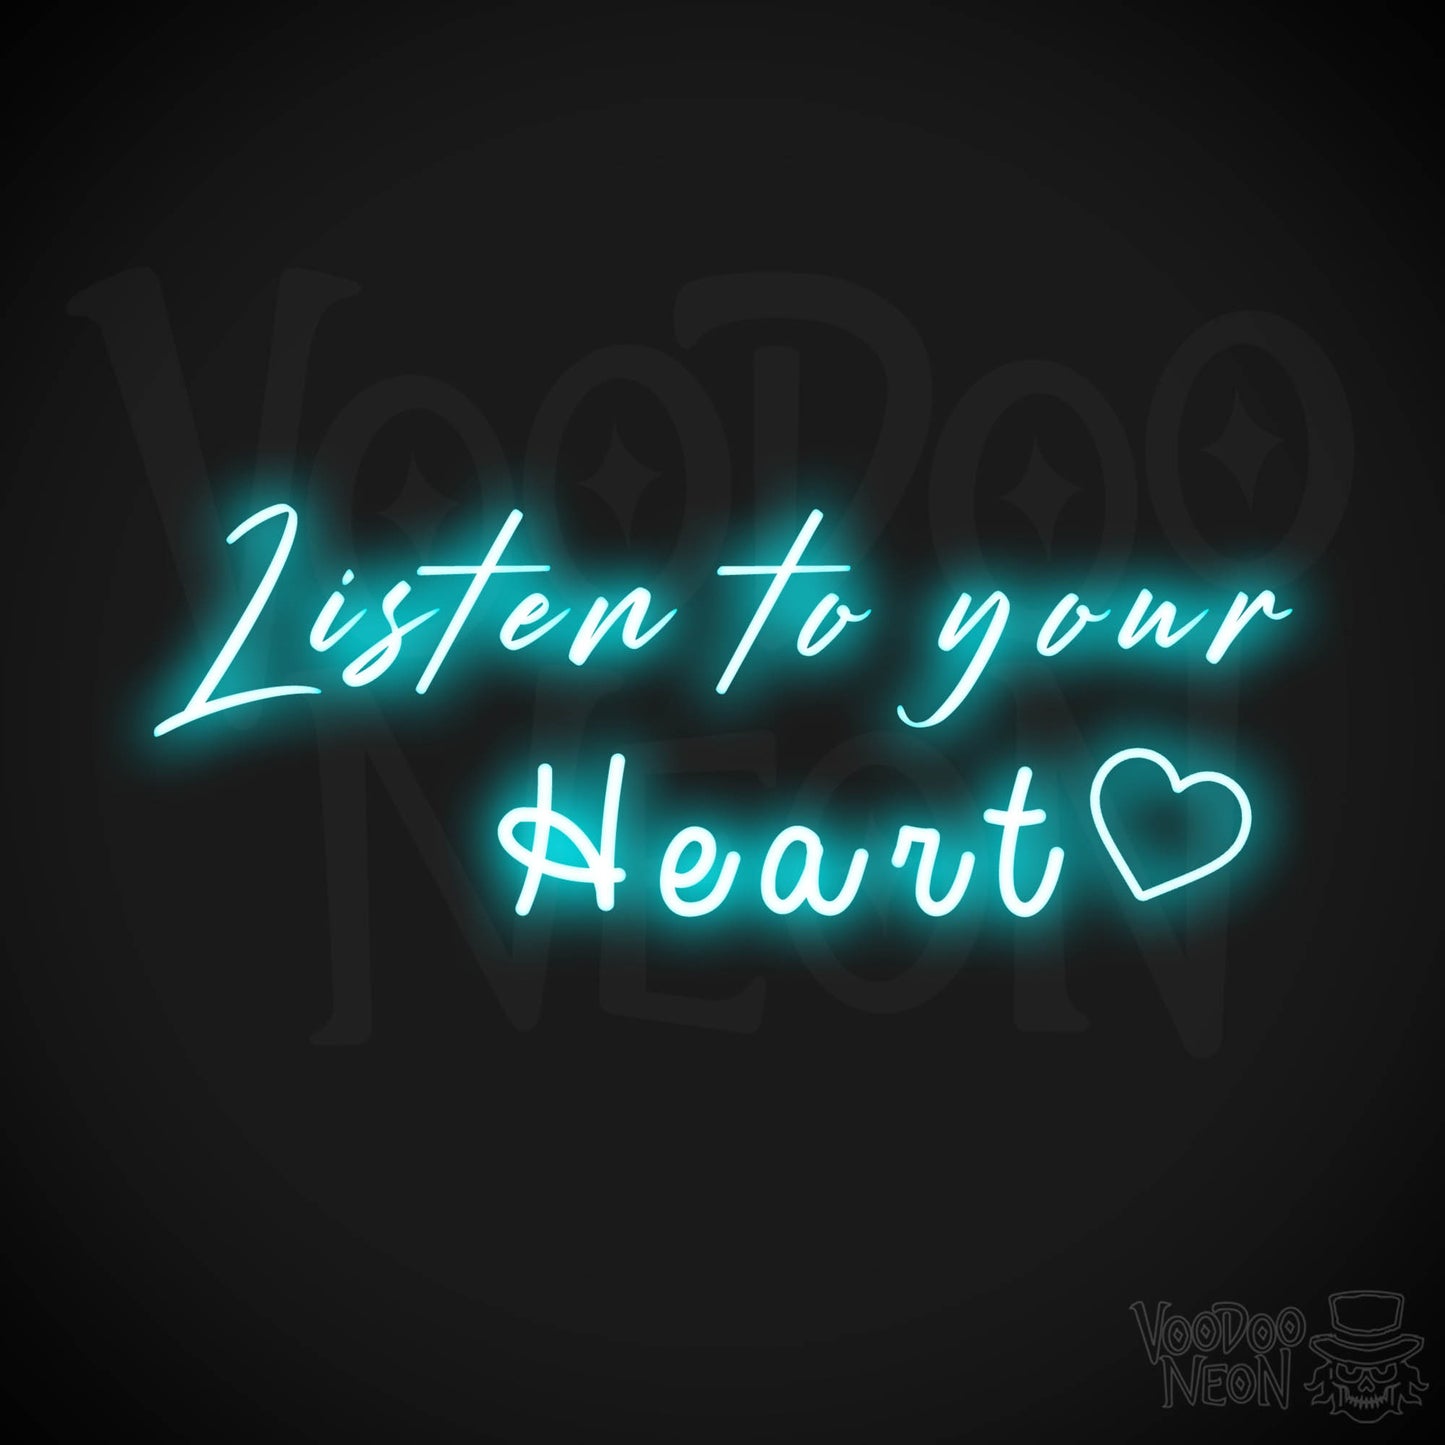 Listen To Your Heart Neon Sign - Neon Listen To Your Heart Sign - Wedding Sign - Color Ice Blue